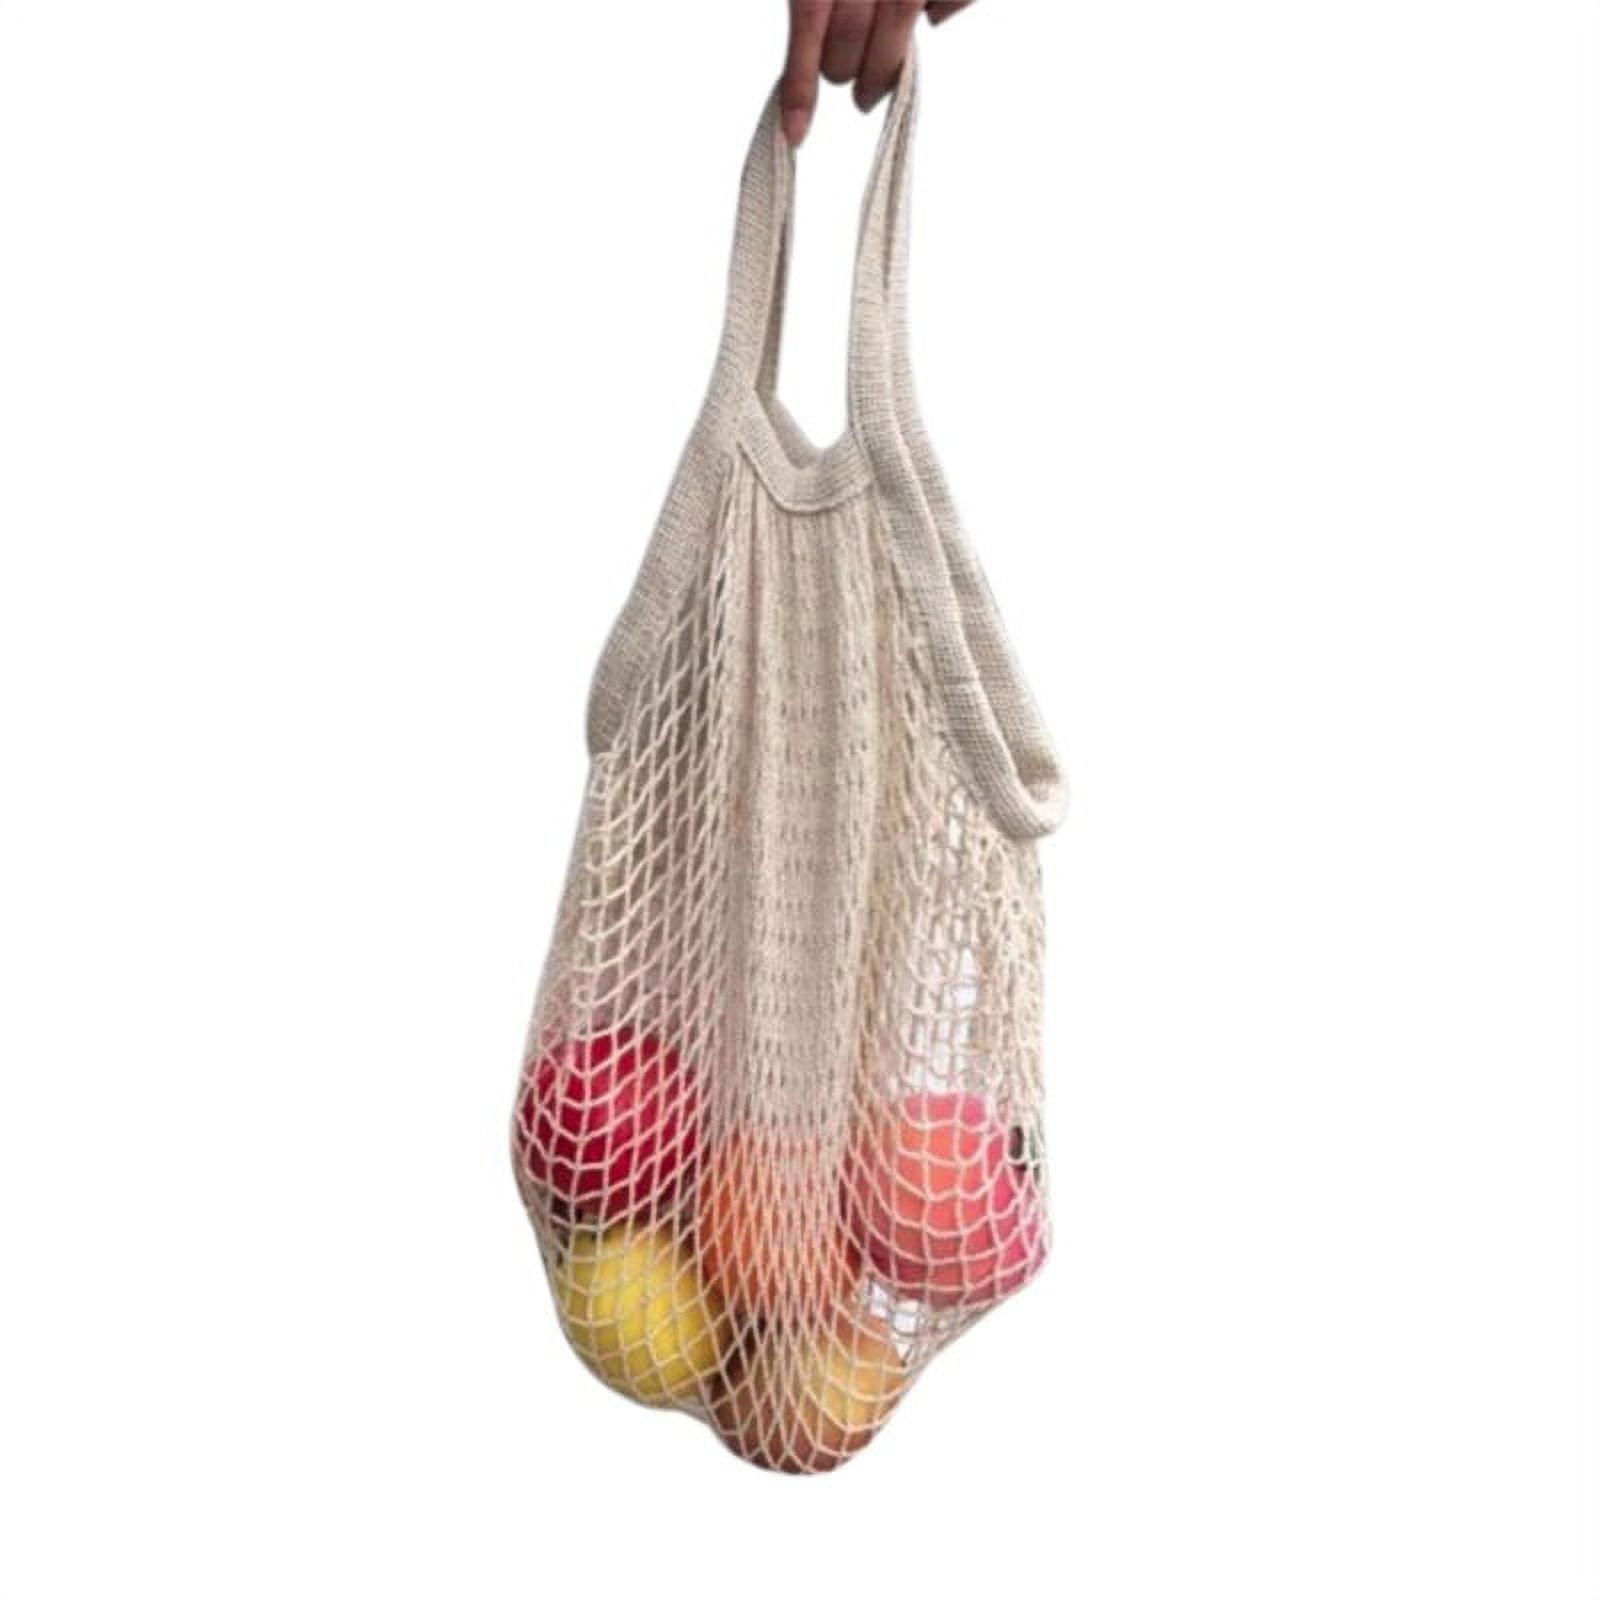 Reusable Eco Bags Fruit Shopping String Grocery Shopper Tote Mesh Woven Net Bag, Kids Unisex, Size: One-Size, Beige